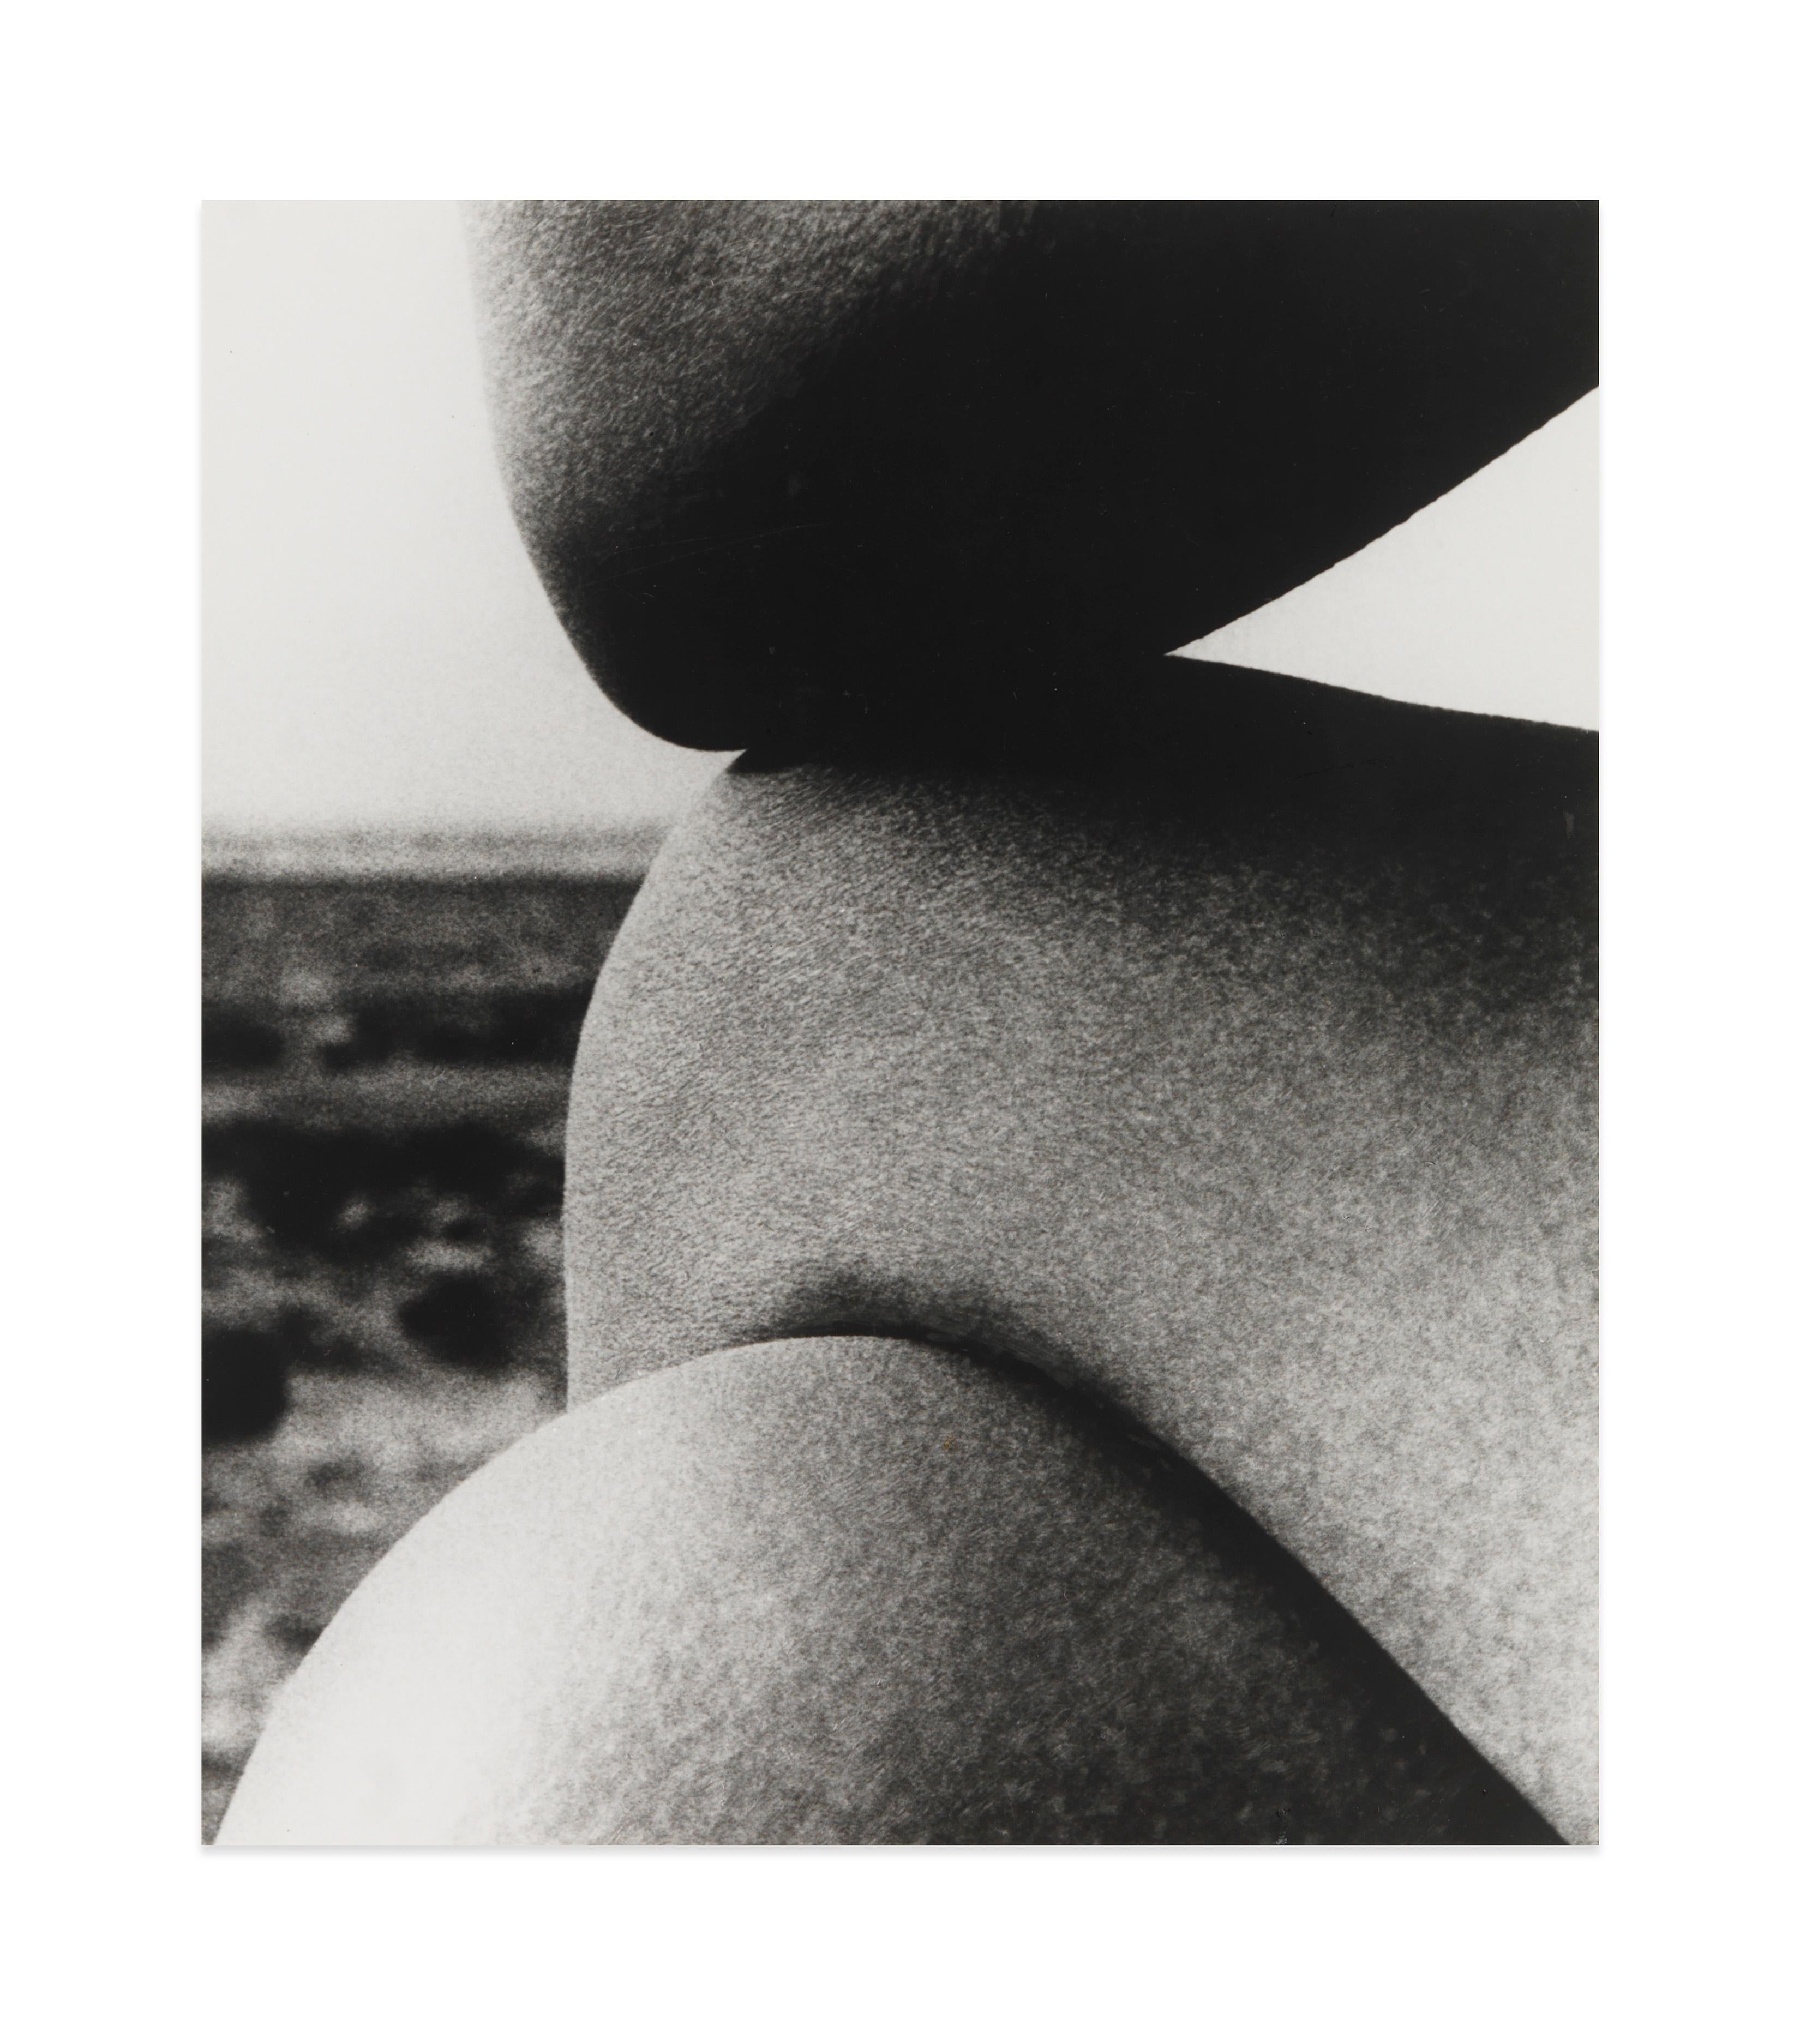 Nude, East Sussex Coast - Photograph by Bill Brandt